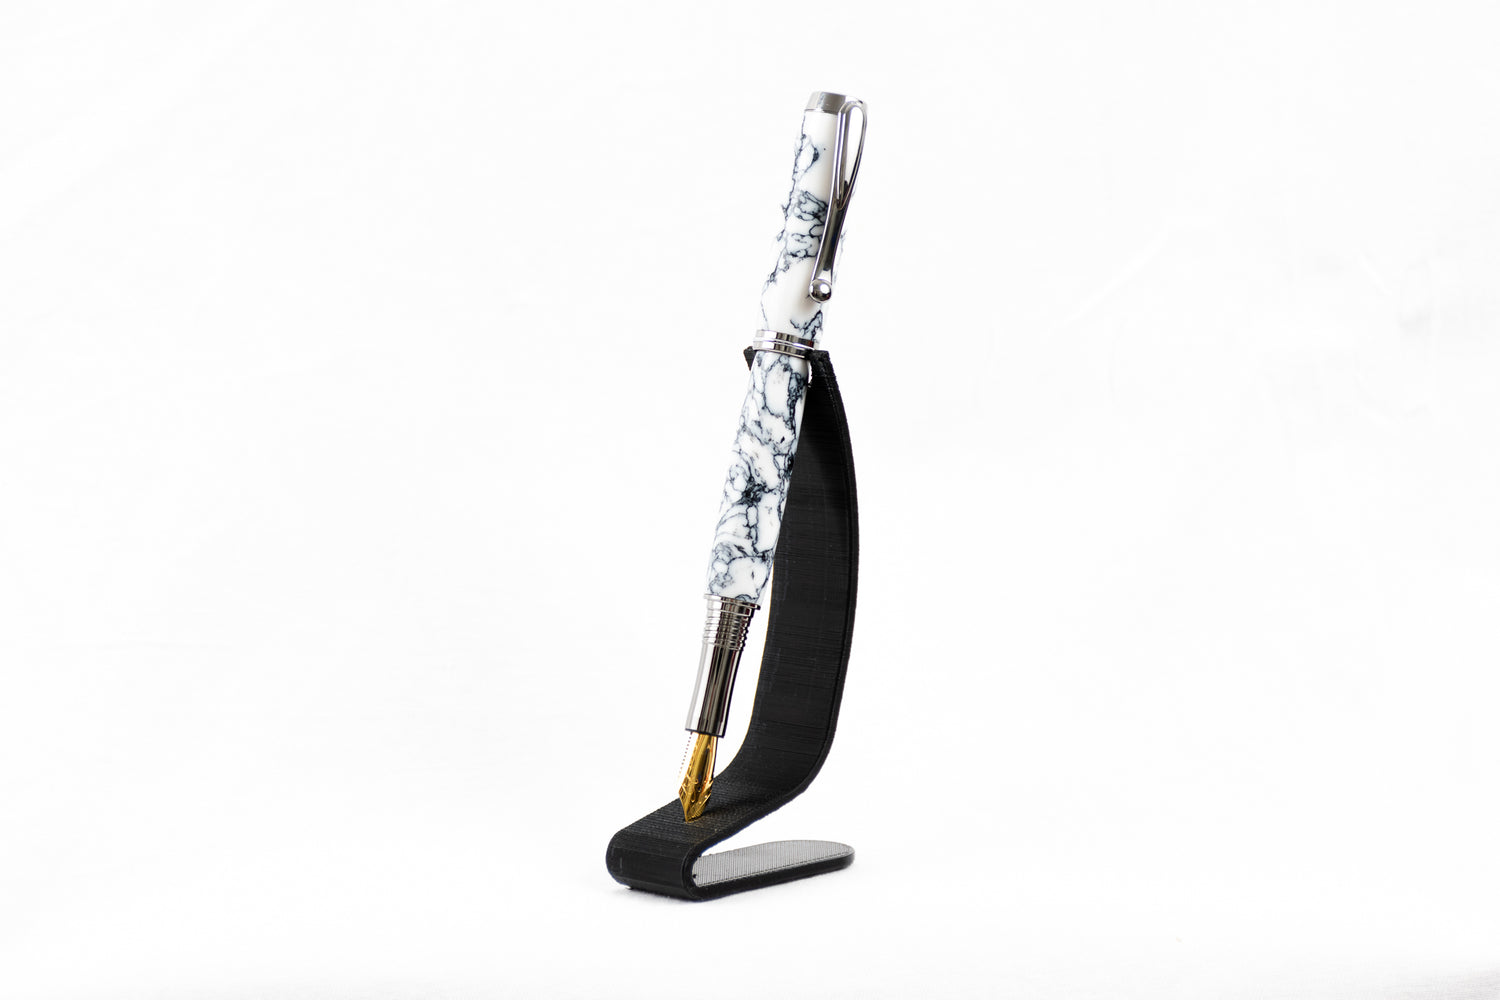 A handmade white and black marbled trustone fountain pen on a black stand